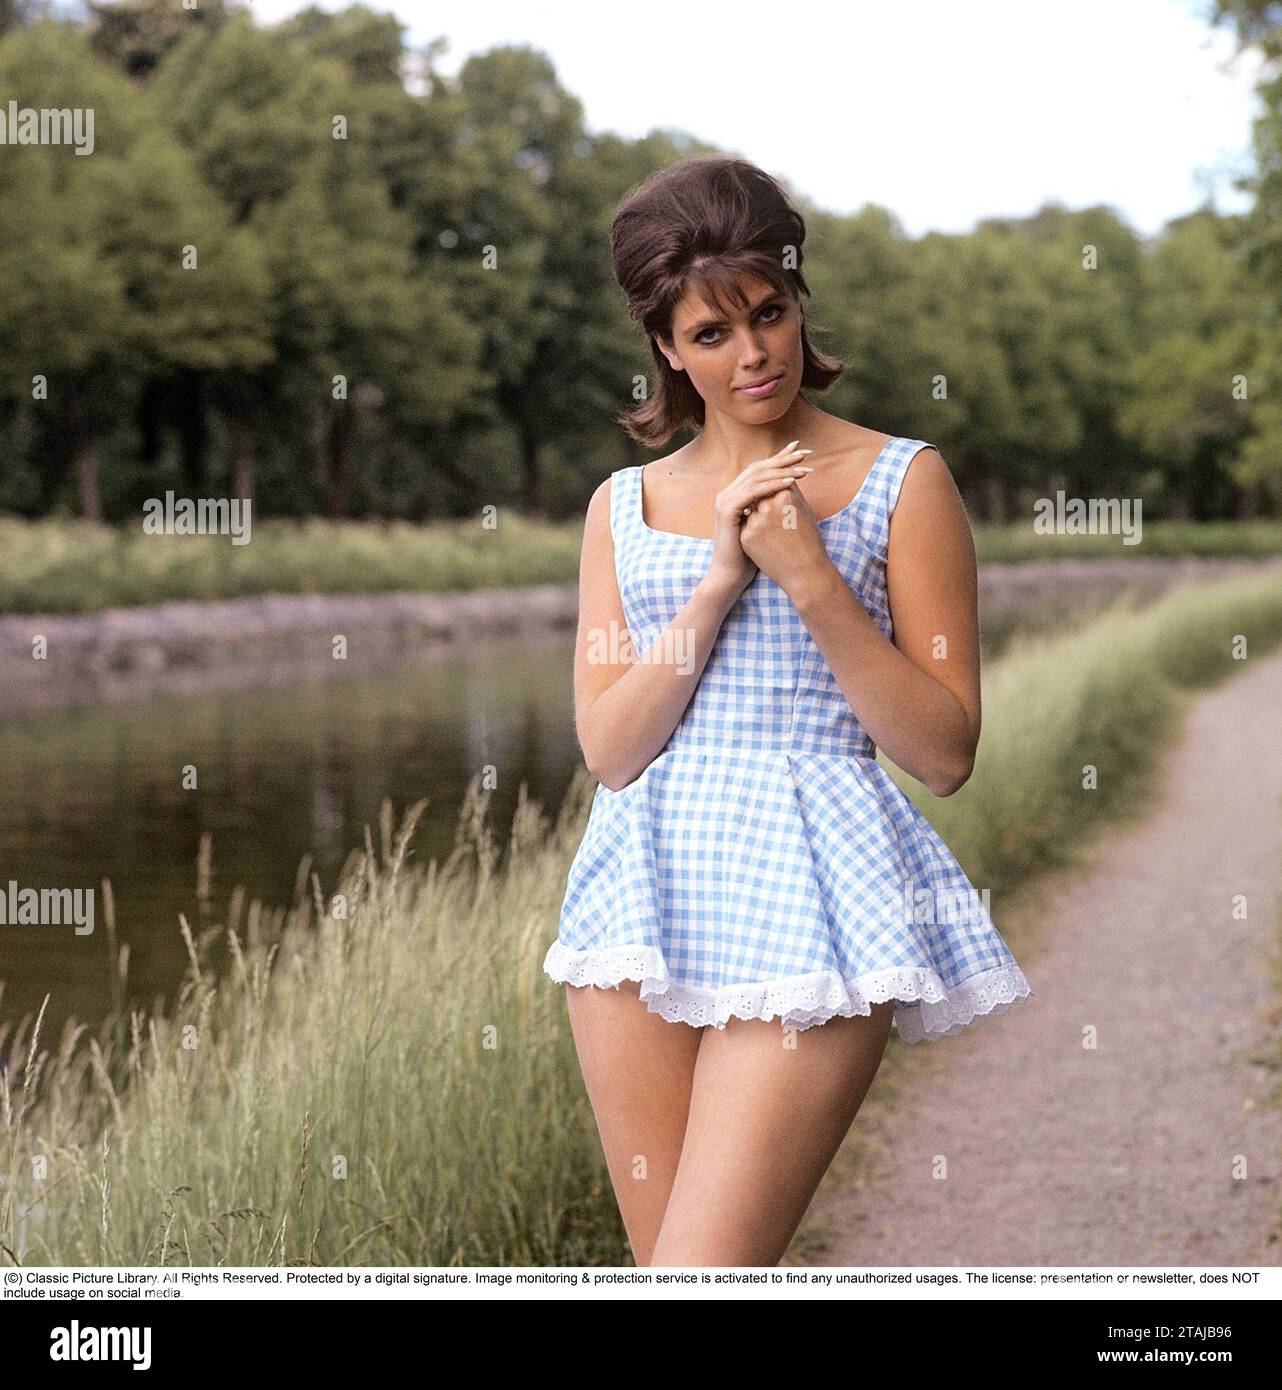 In the 1960s. A dark-haired girl pictured wearing a short chequered patterned dress. 1969 Stock Photo